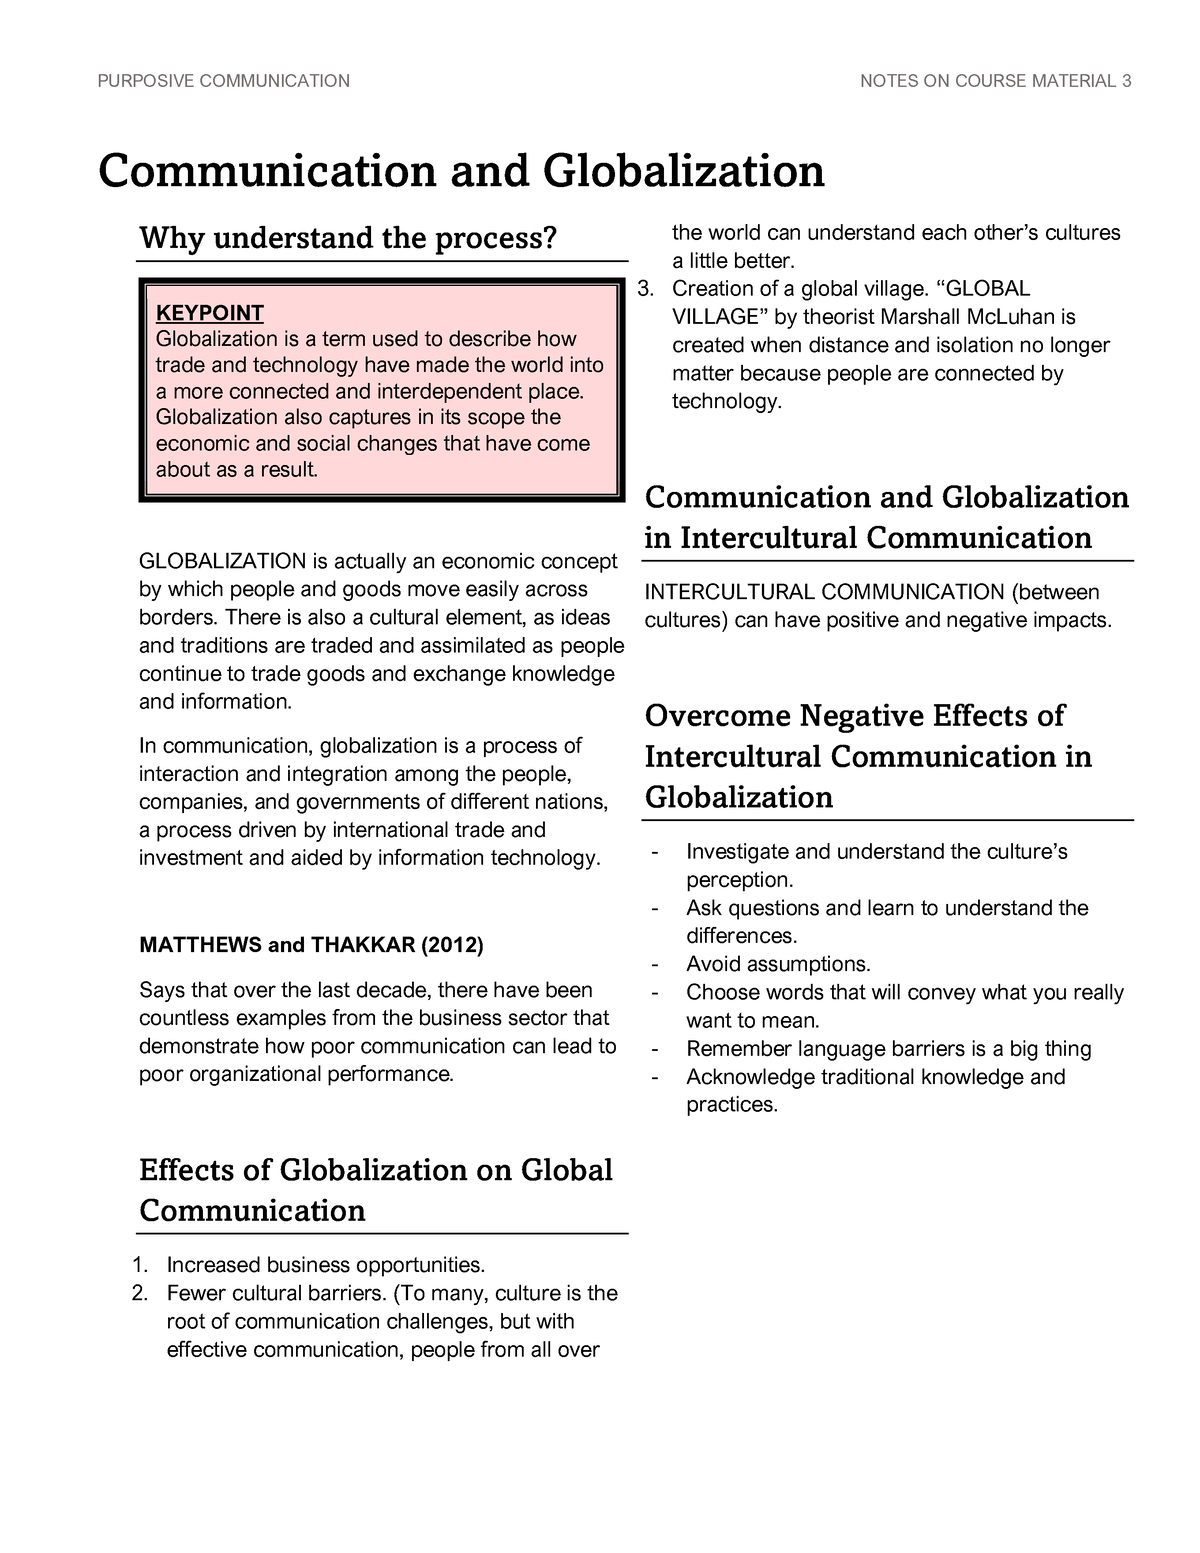 communication and globalization in purposive communication essay